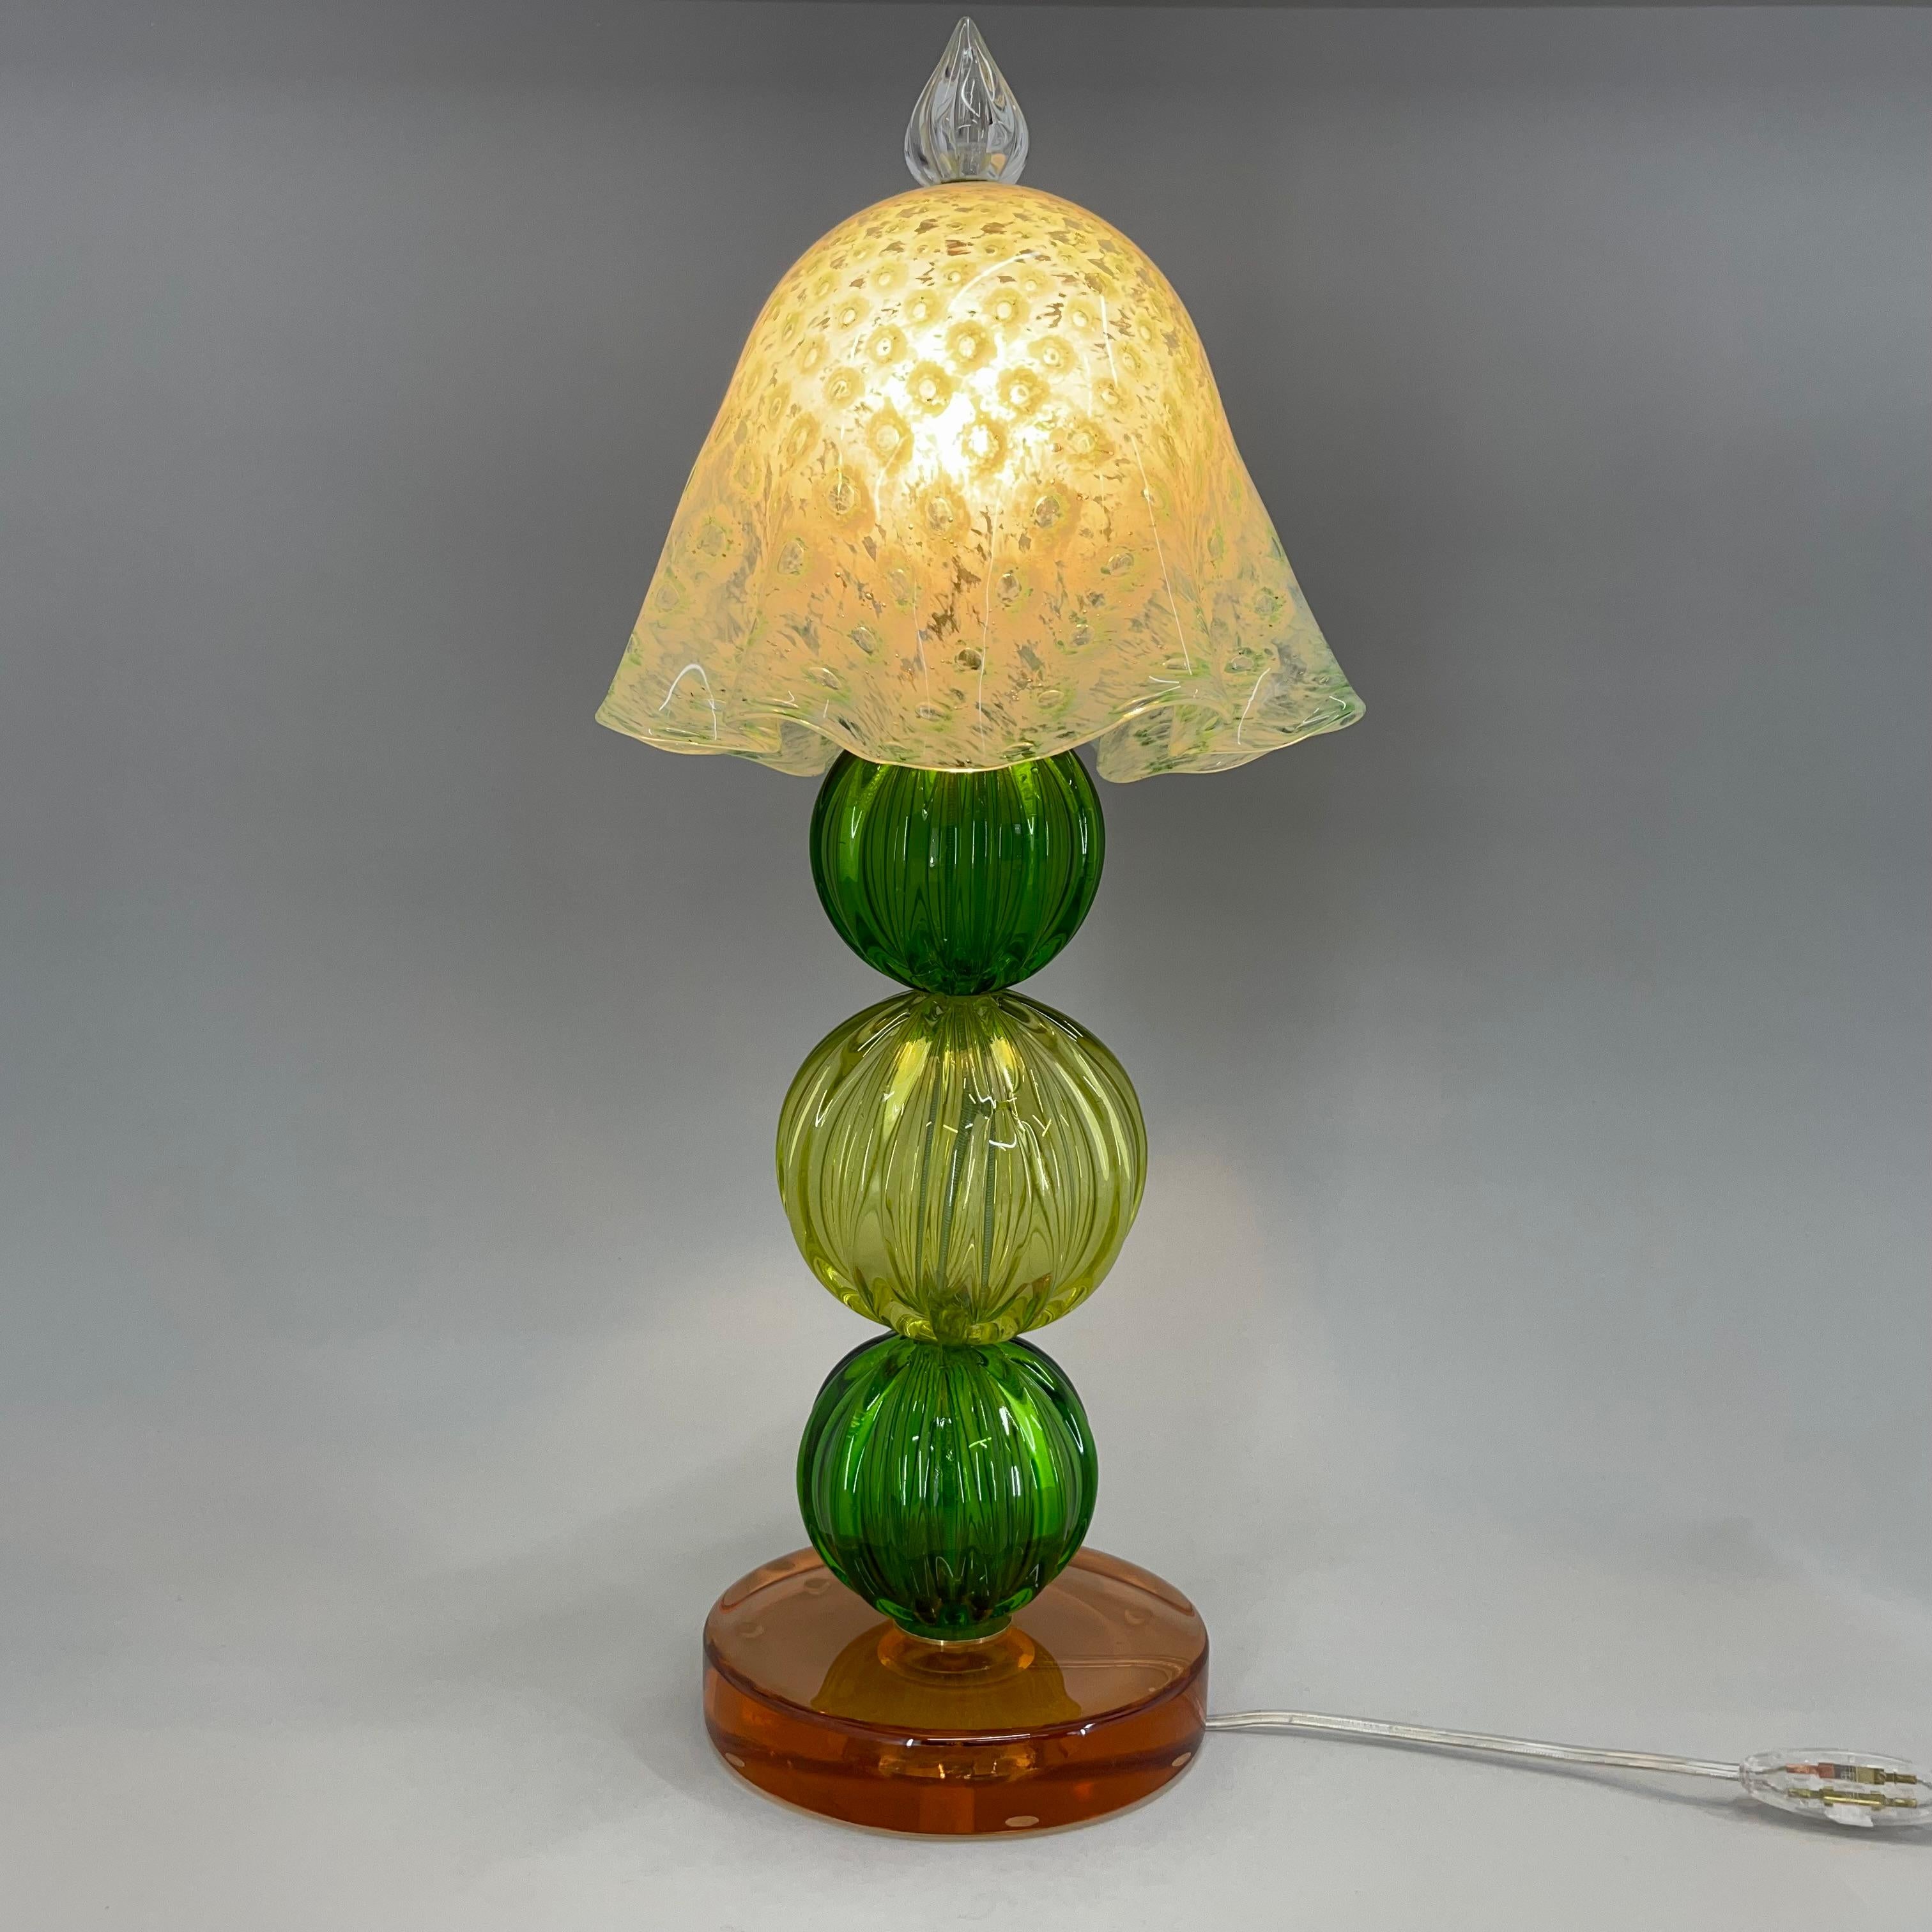 Rare vintage all glass hand made table lamp from Verona (Italy). It is a beautiful piece of lighting from the 1990's.